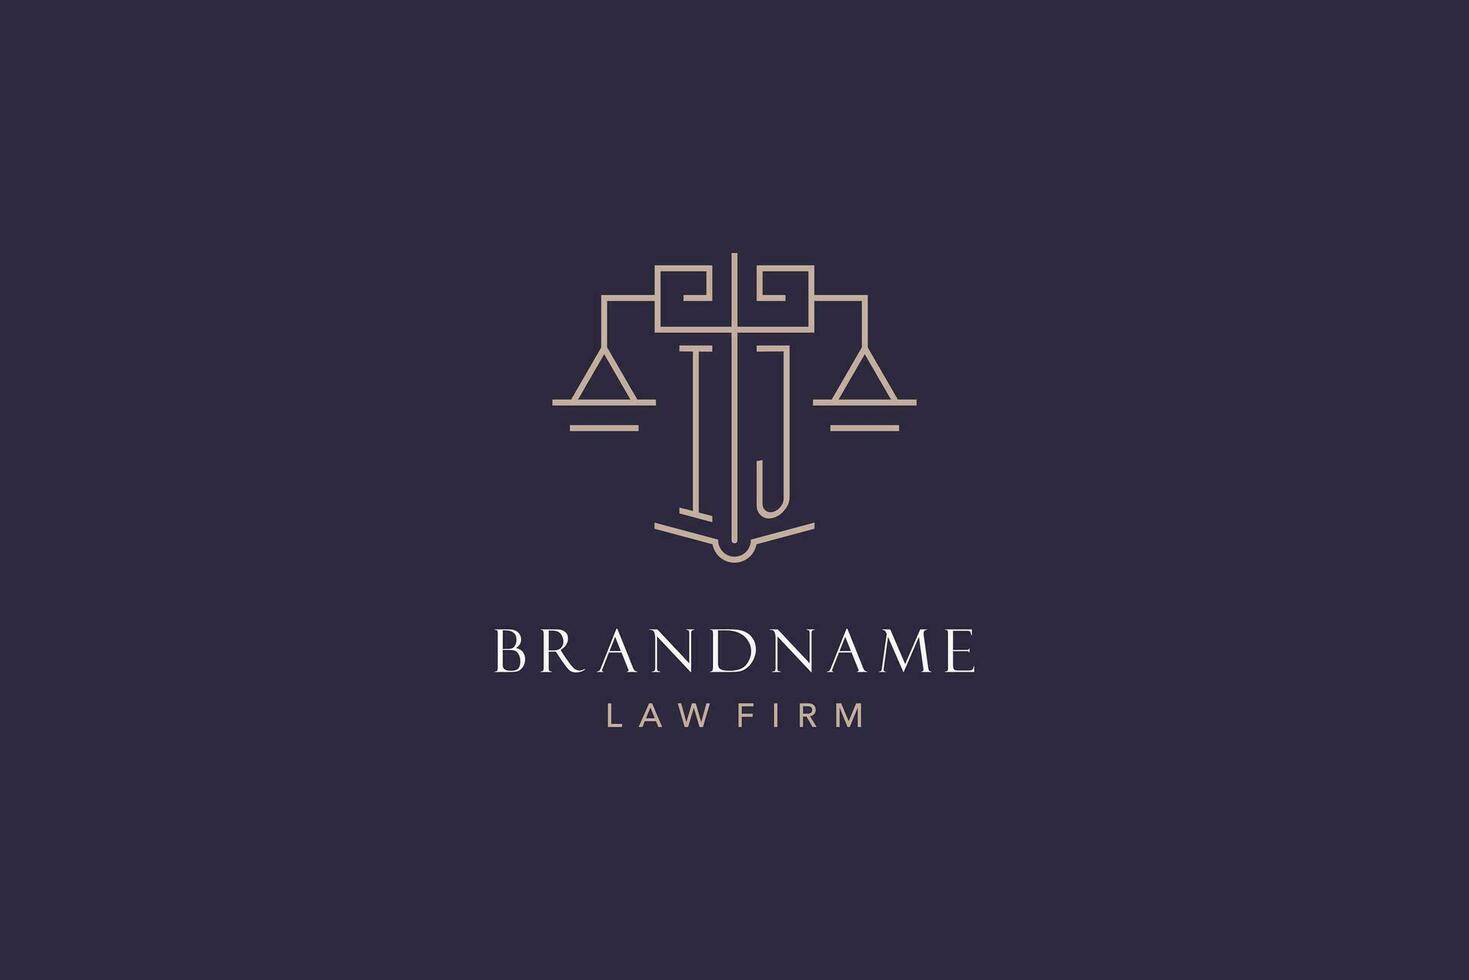 Initial letter IJ logo with scale of justice logo design, luxury legal logo geometric style vector